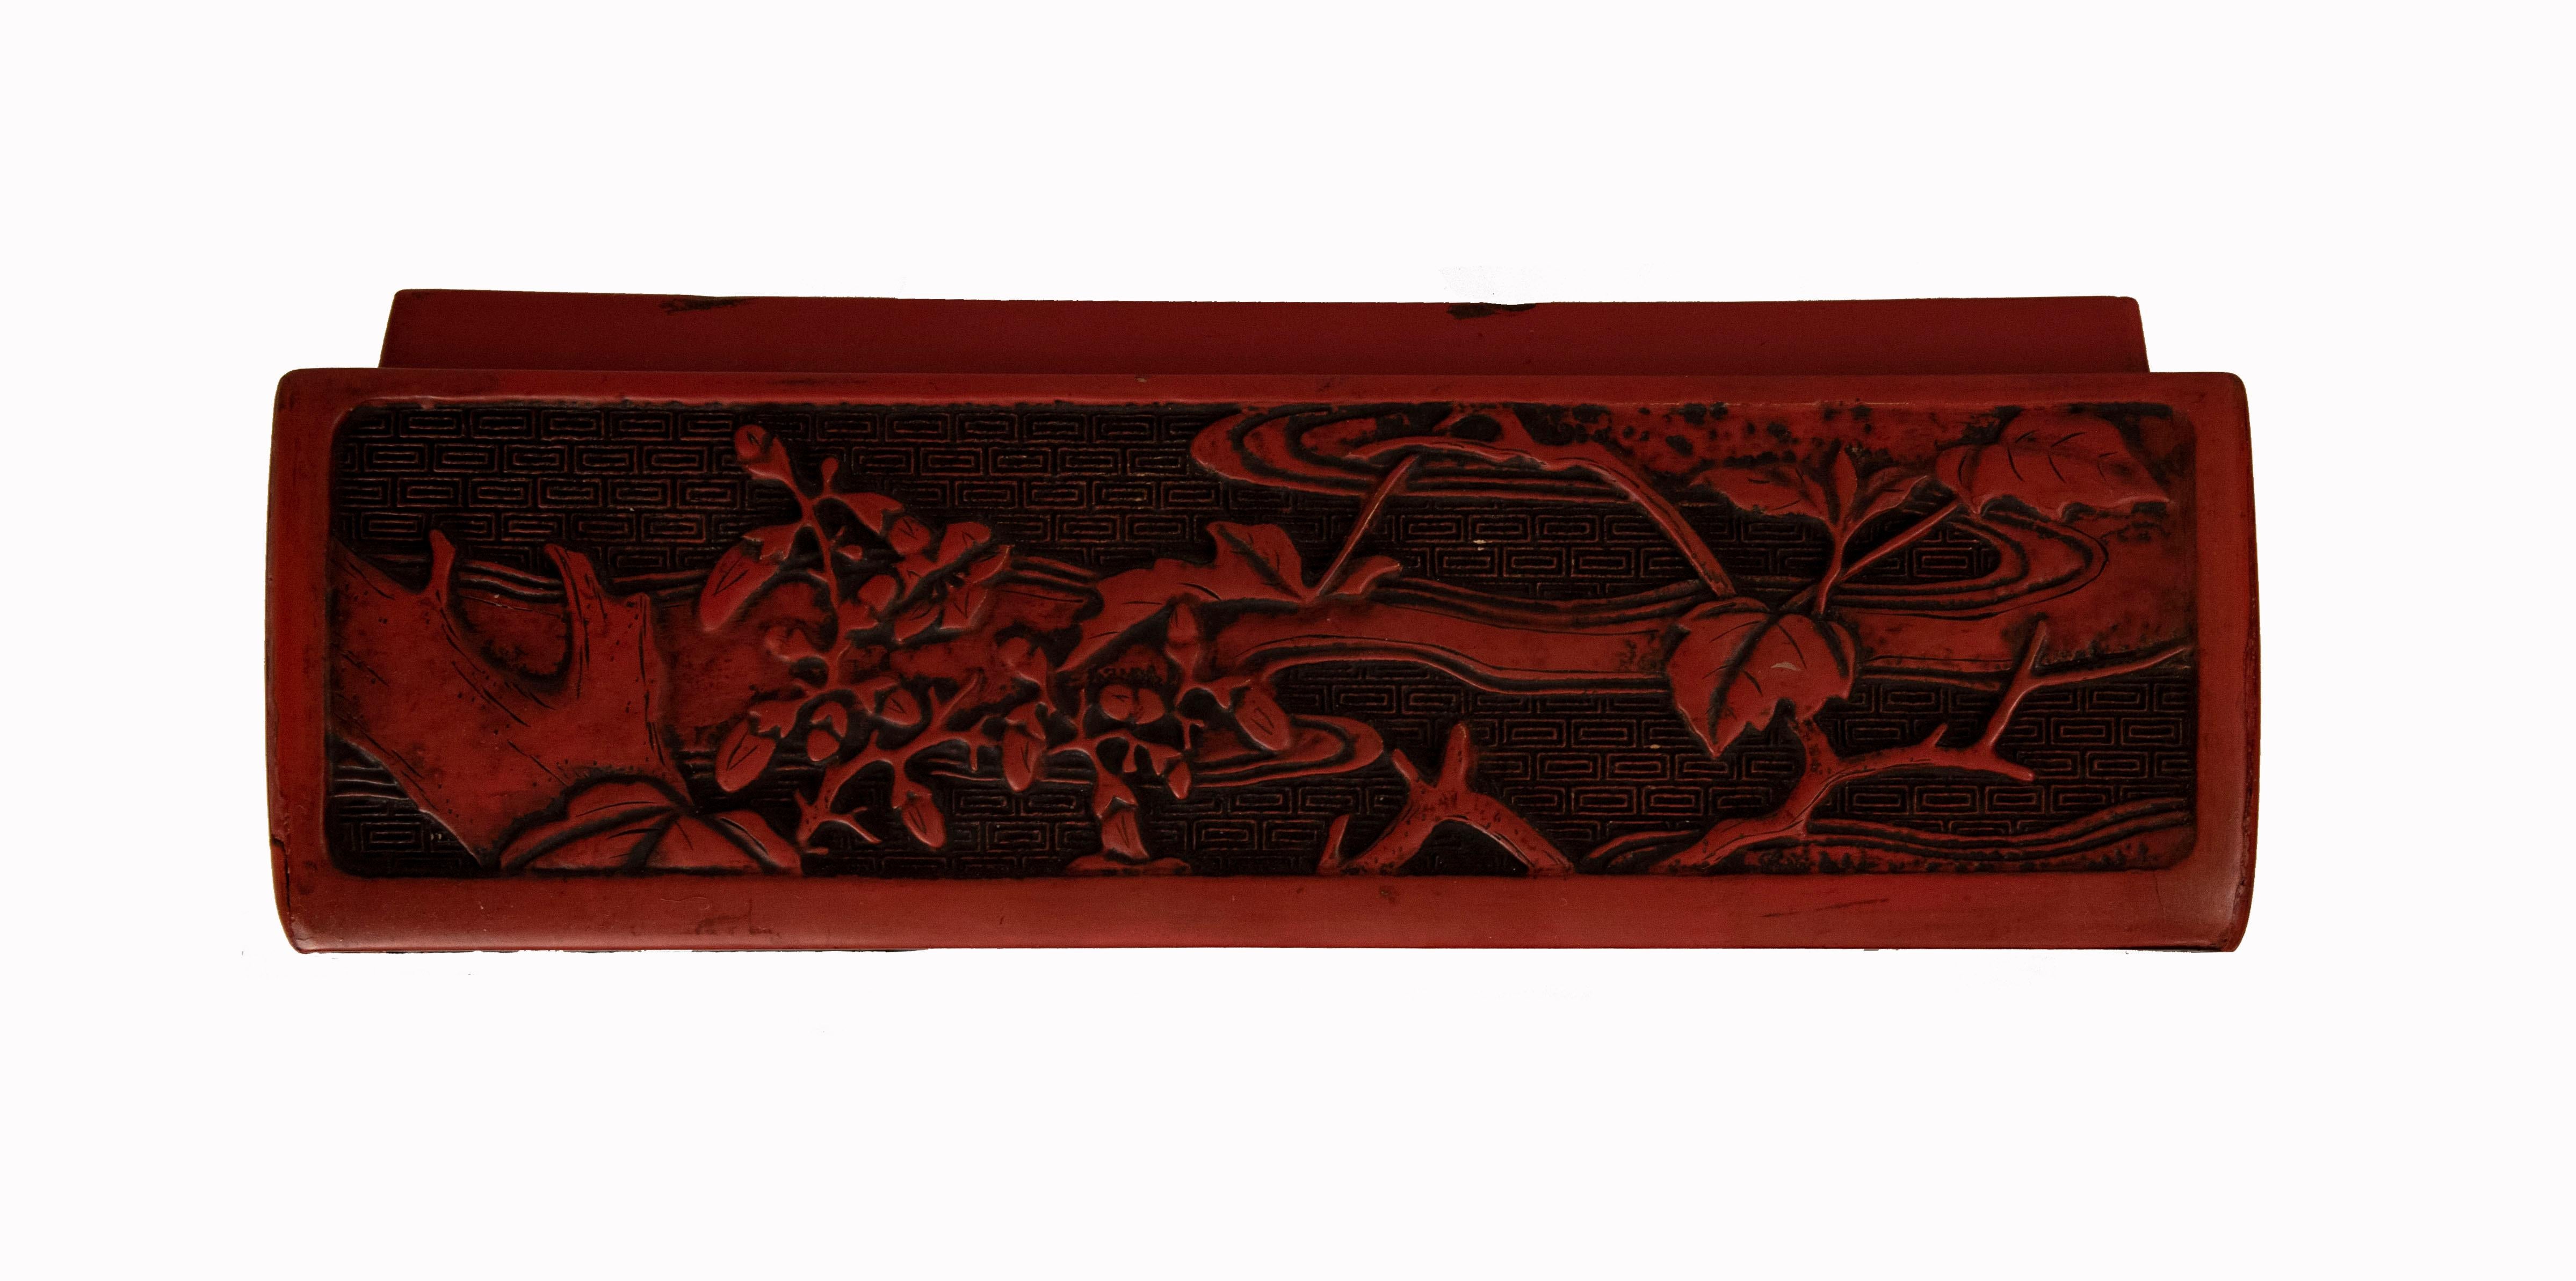 Early 20th Century Antique Chinese Cinnabar Lacquer Rectangular Lidded Box